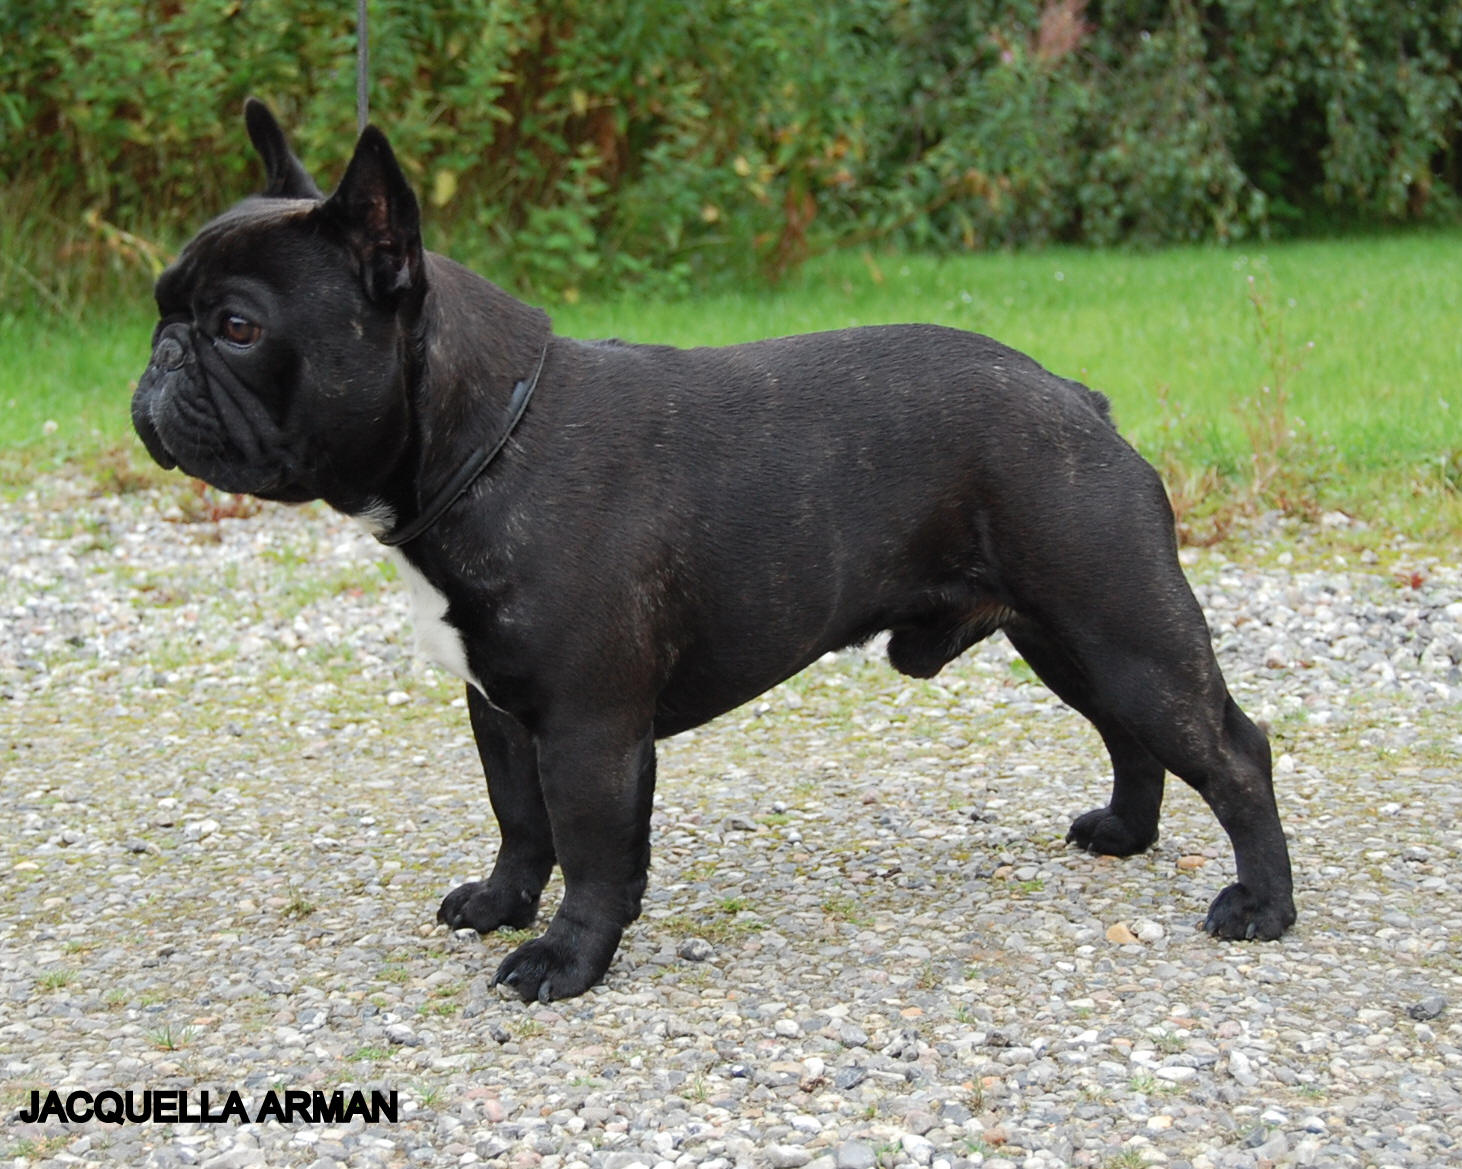 French Bulldog Breed Guide - Learn about the French Bulldog.